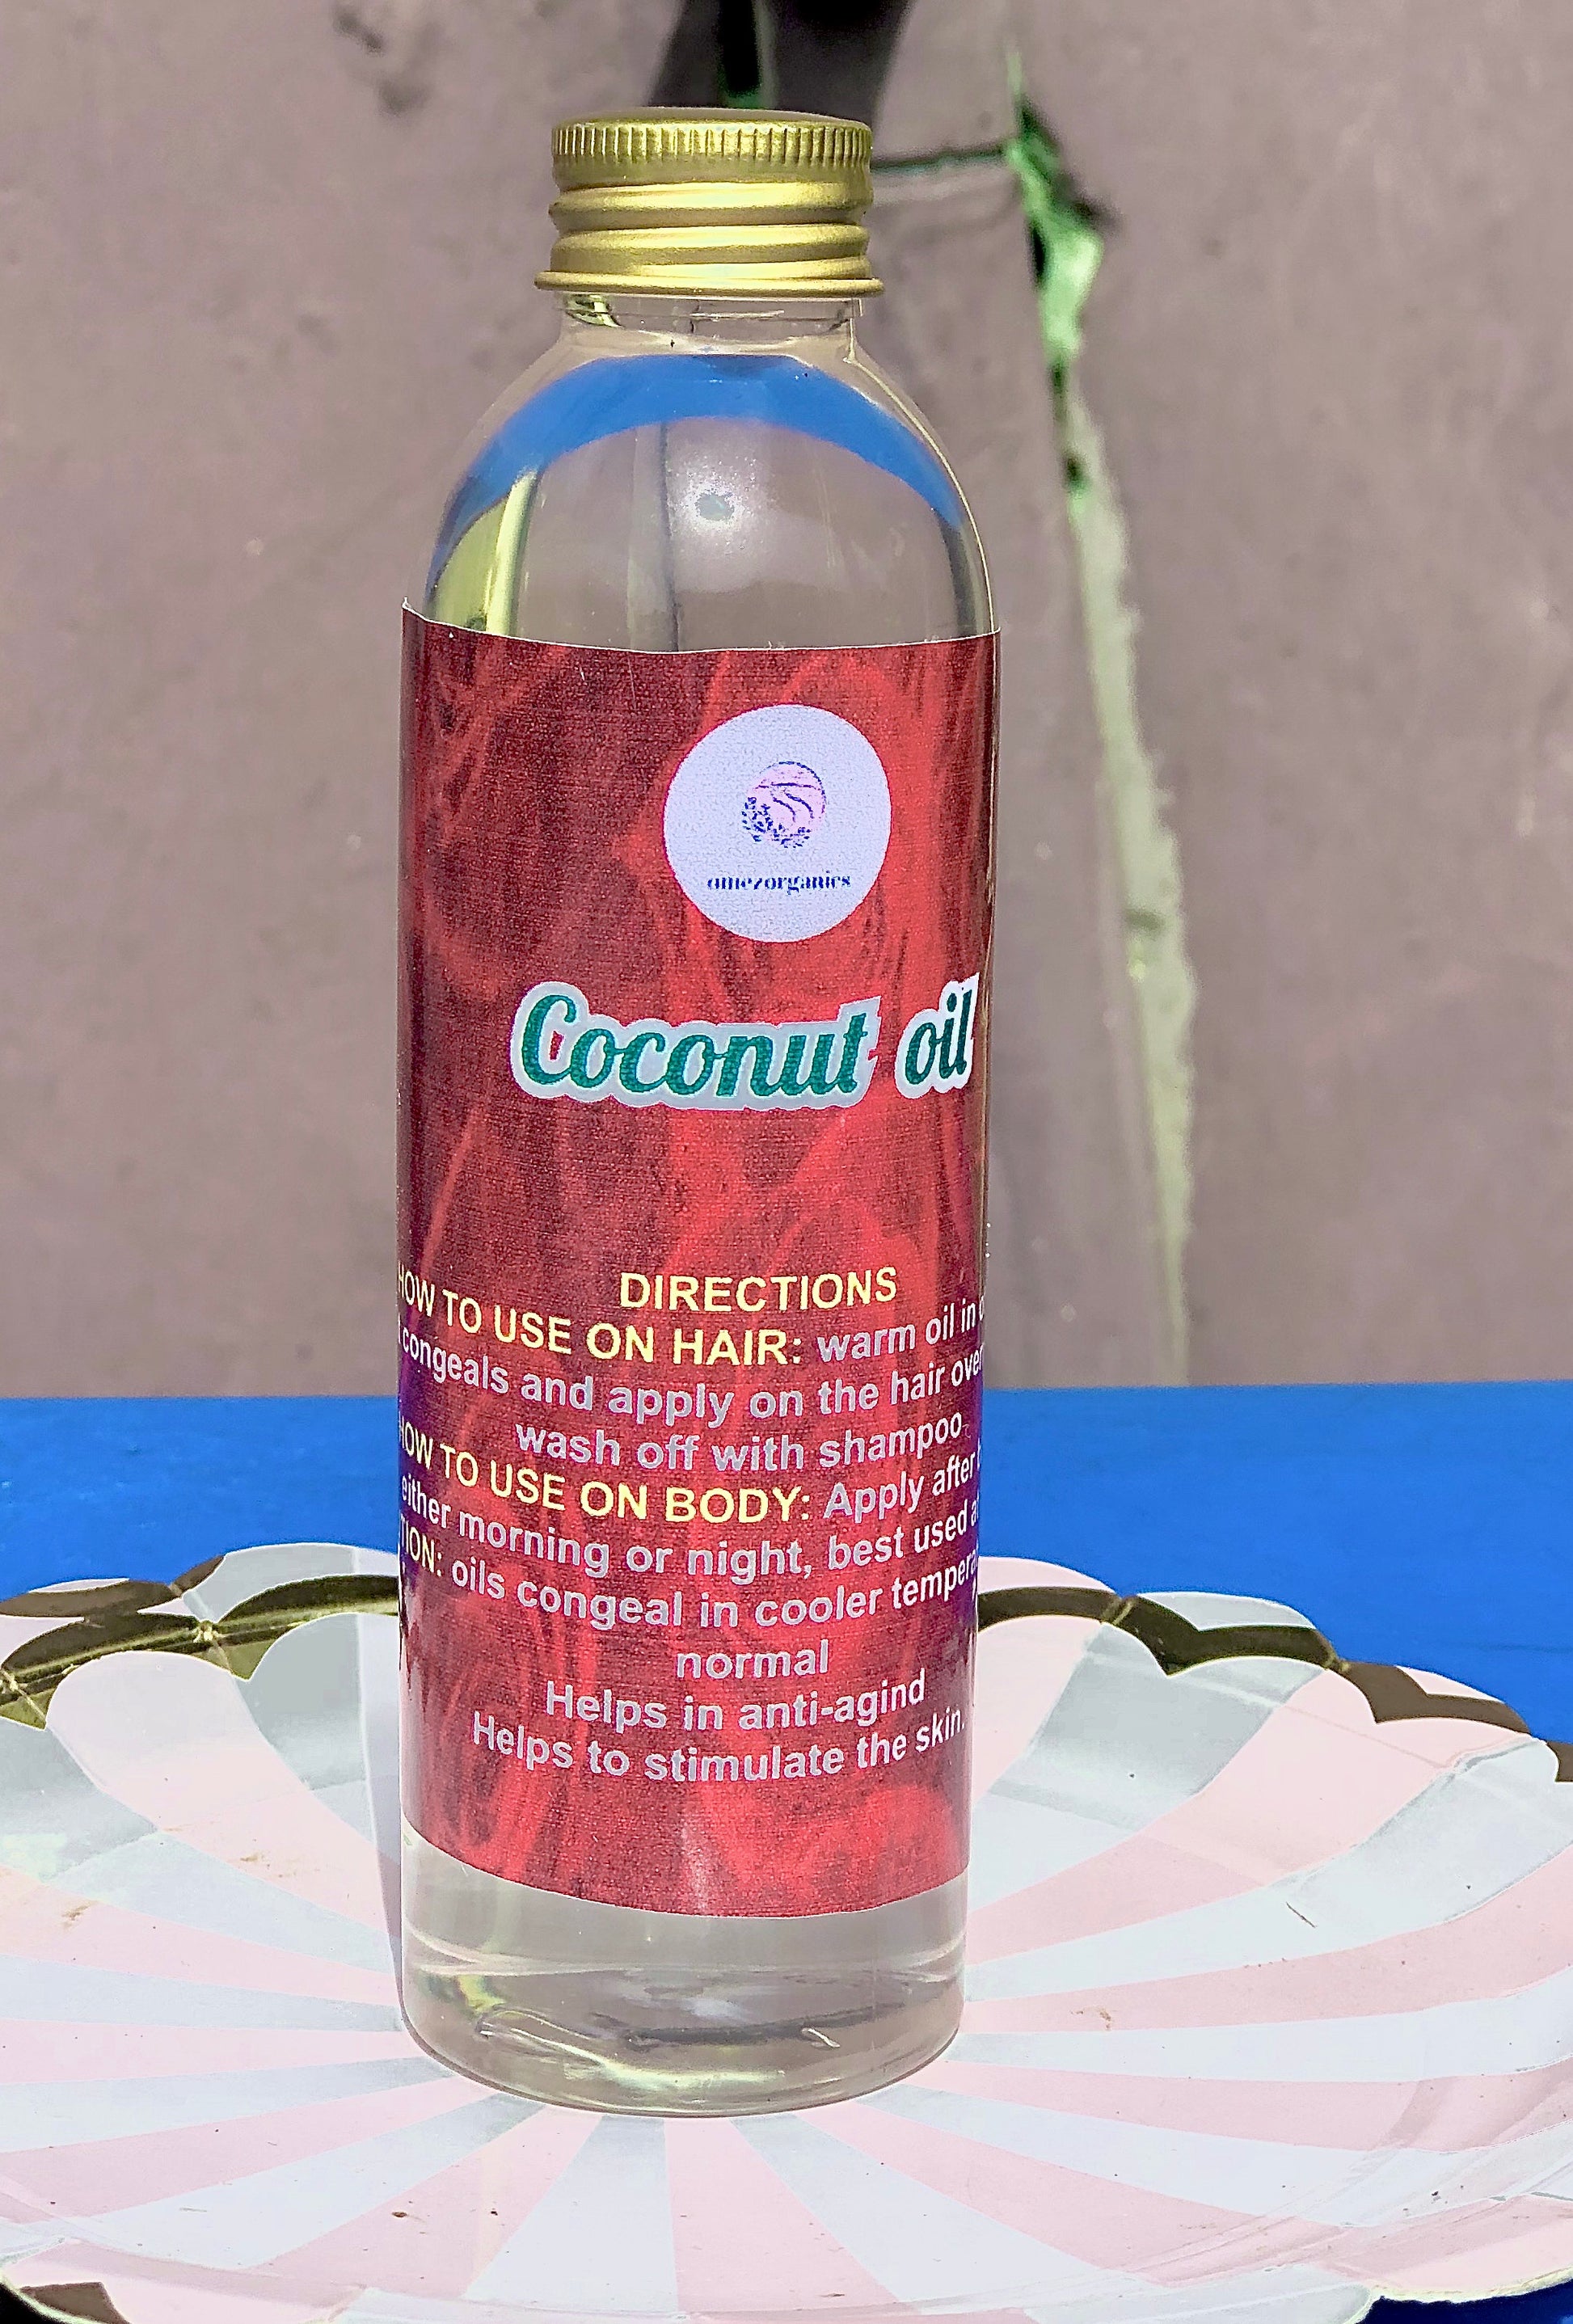 Coconut oil - omez beauty products 